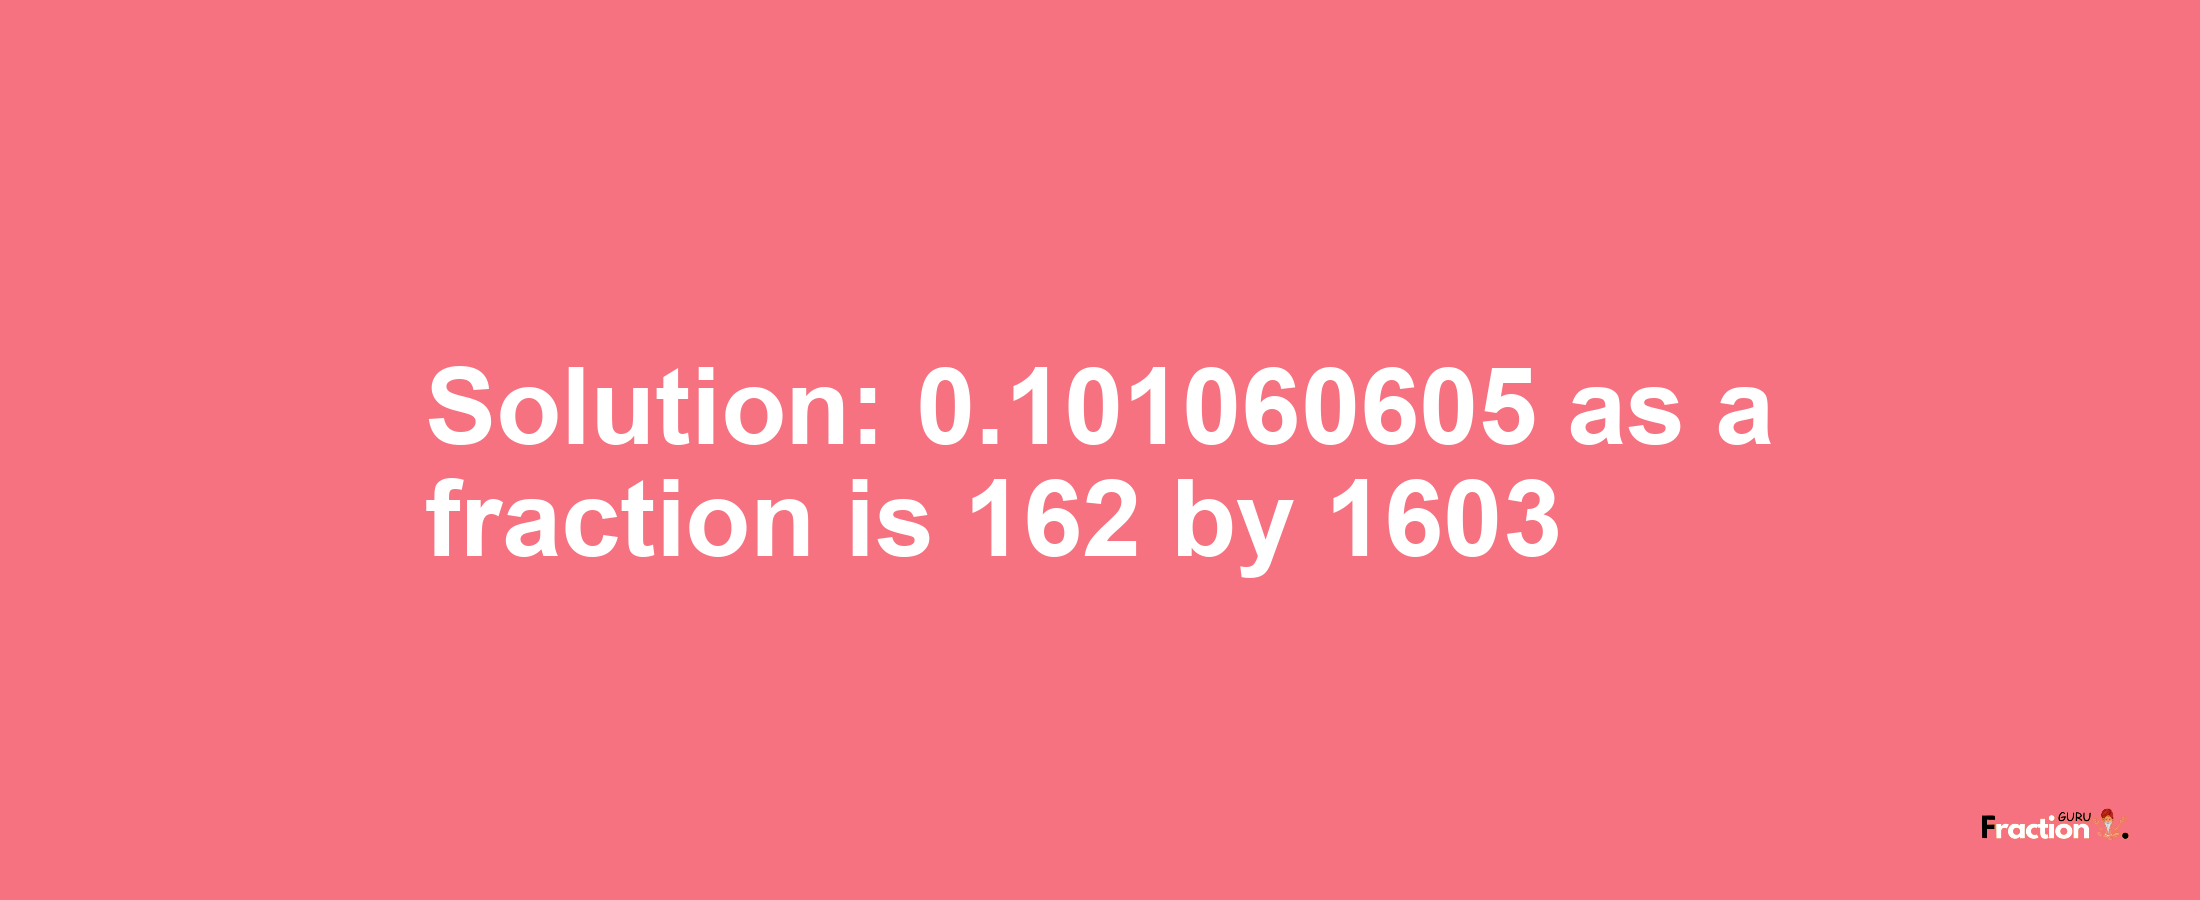 Solution:0.101060605 as a fraction is 162/1603